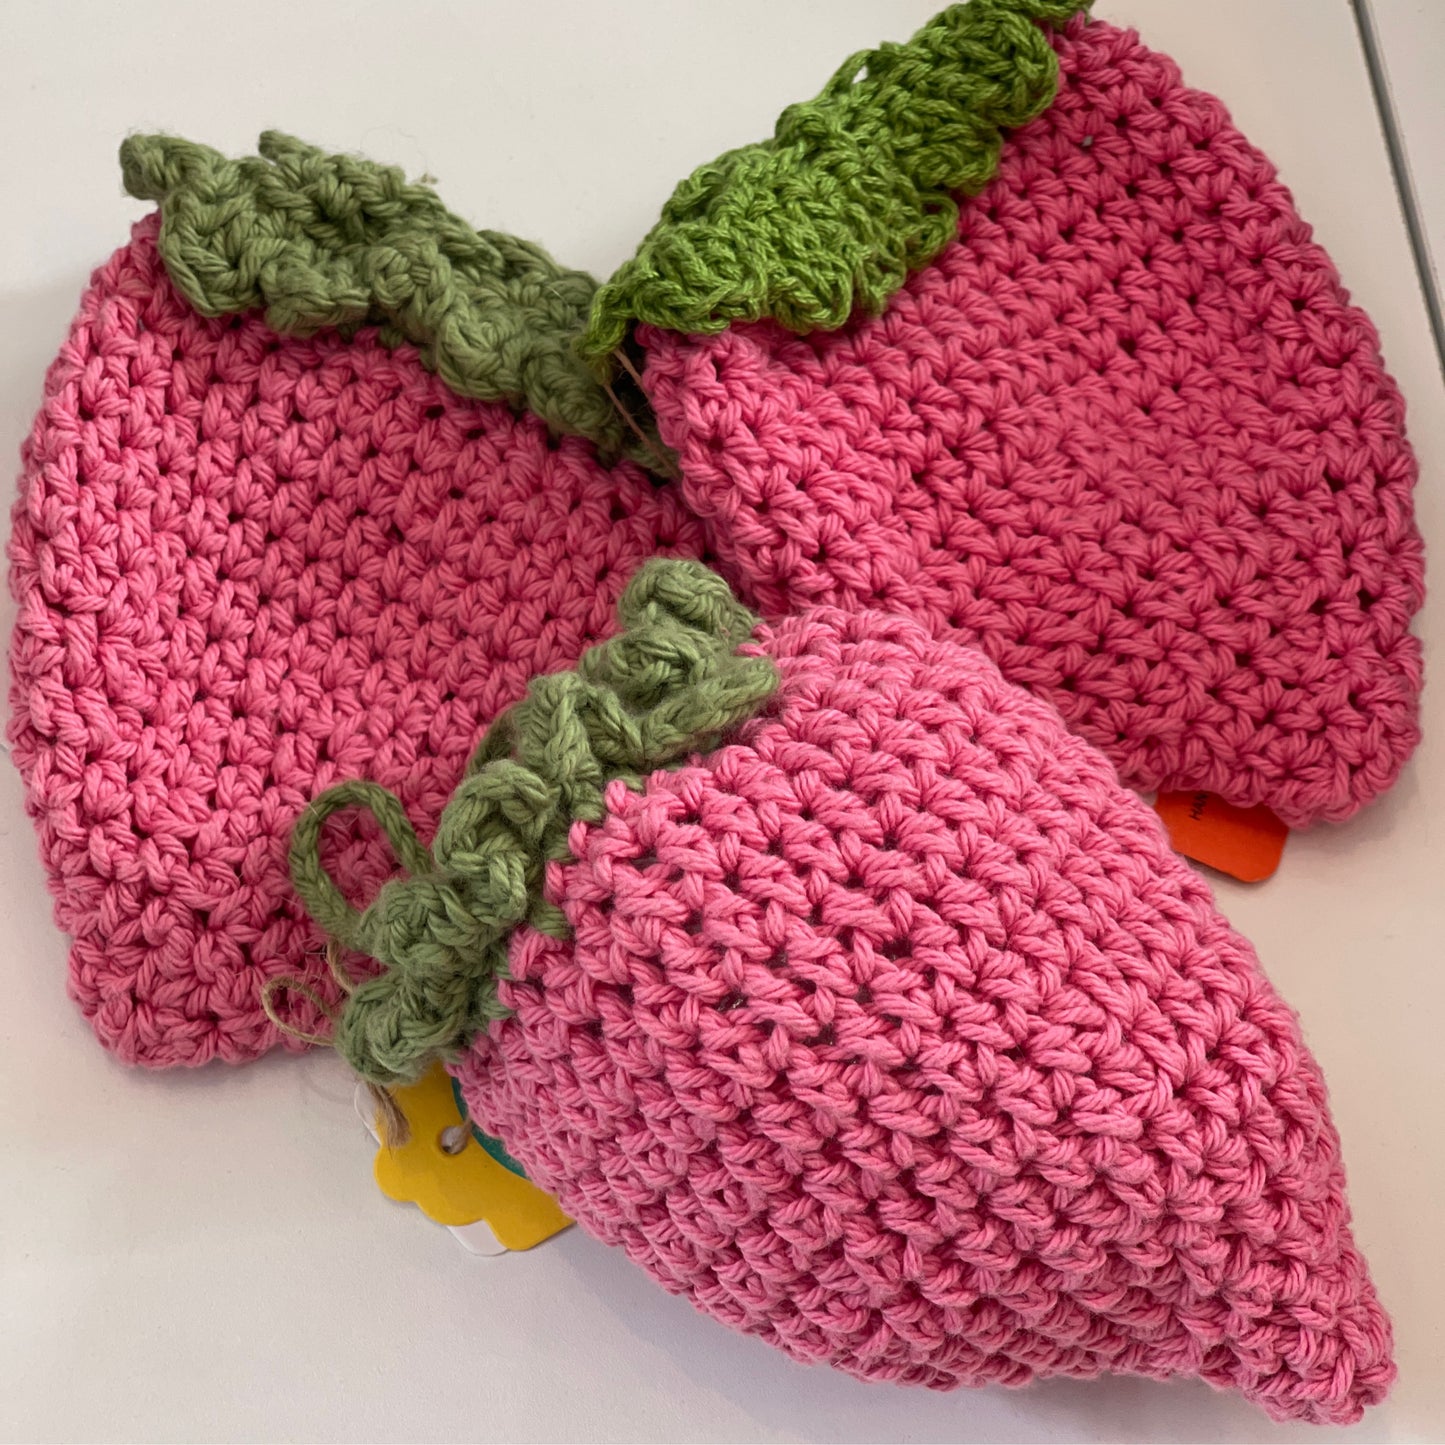 Strawberry dice bags